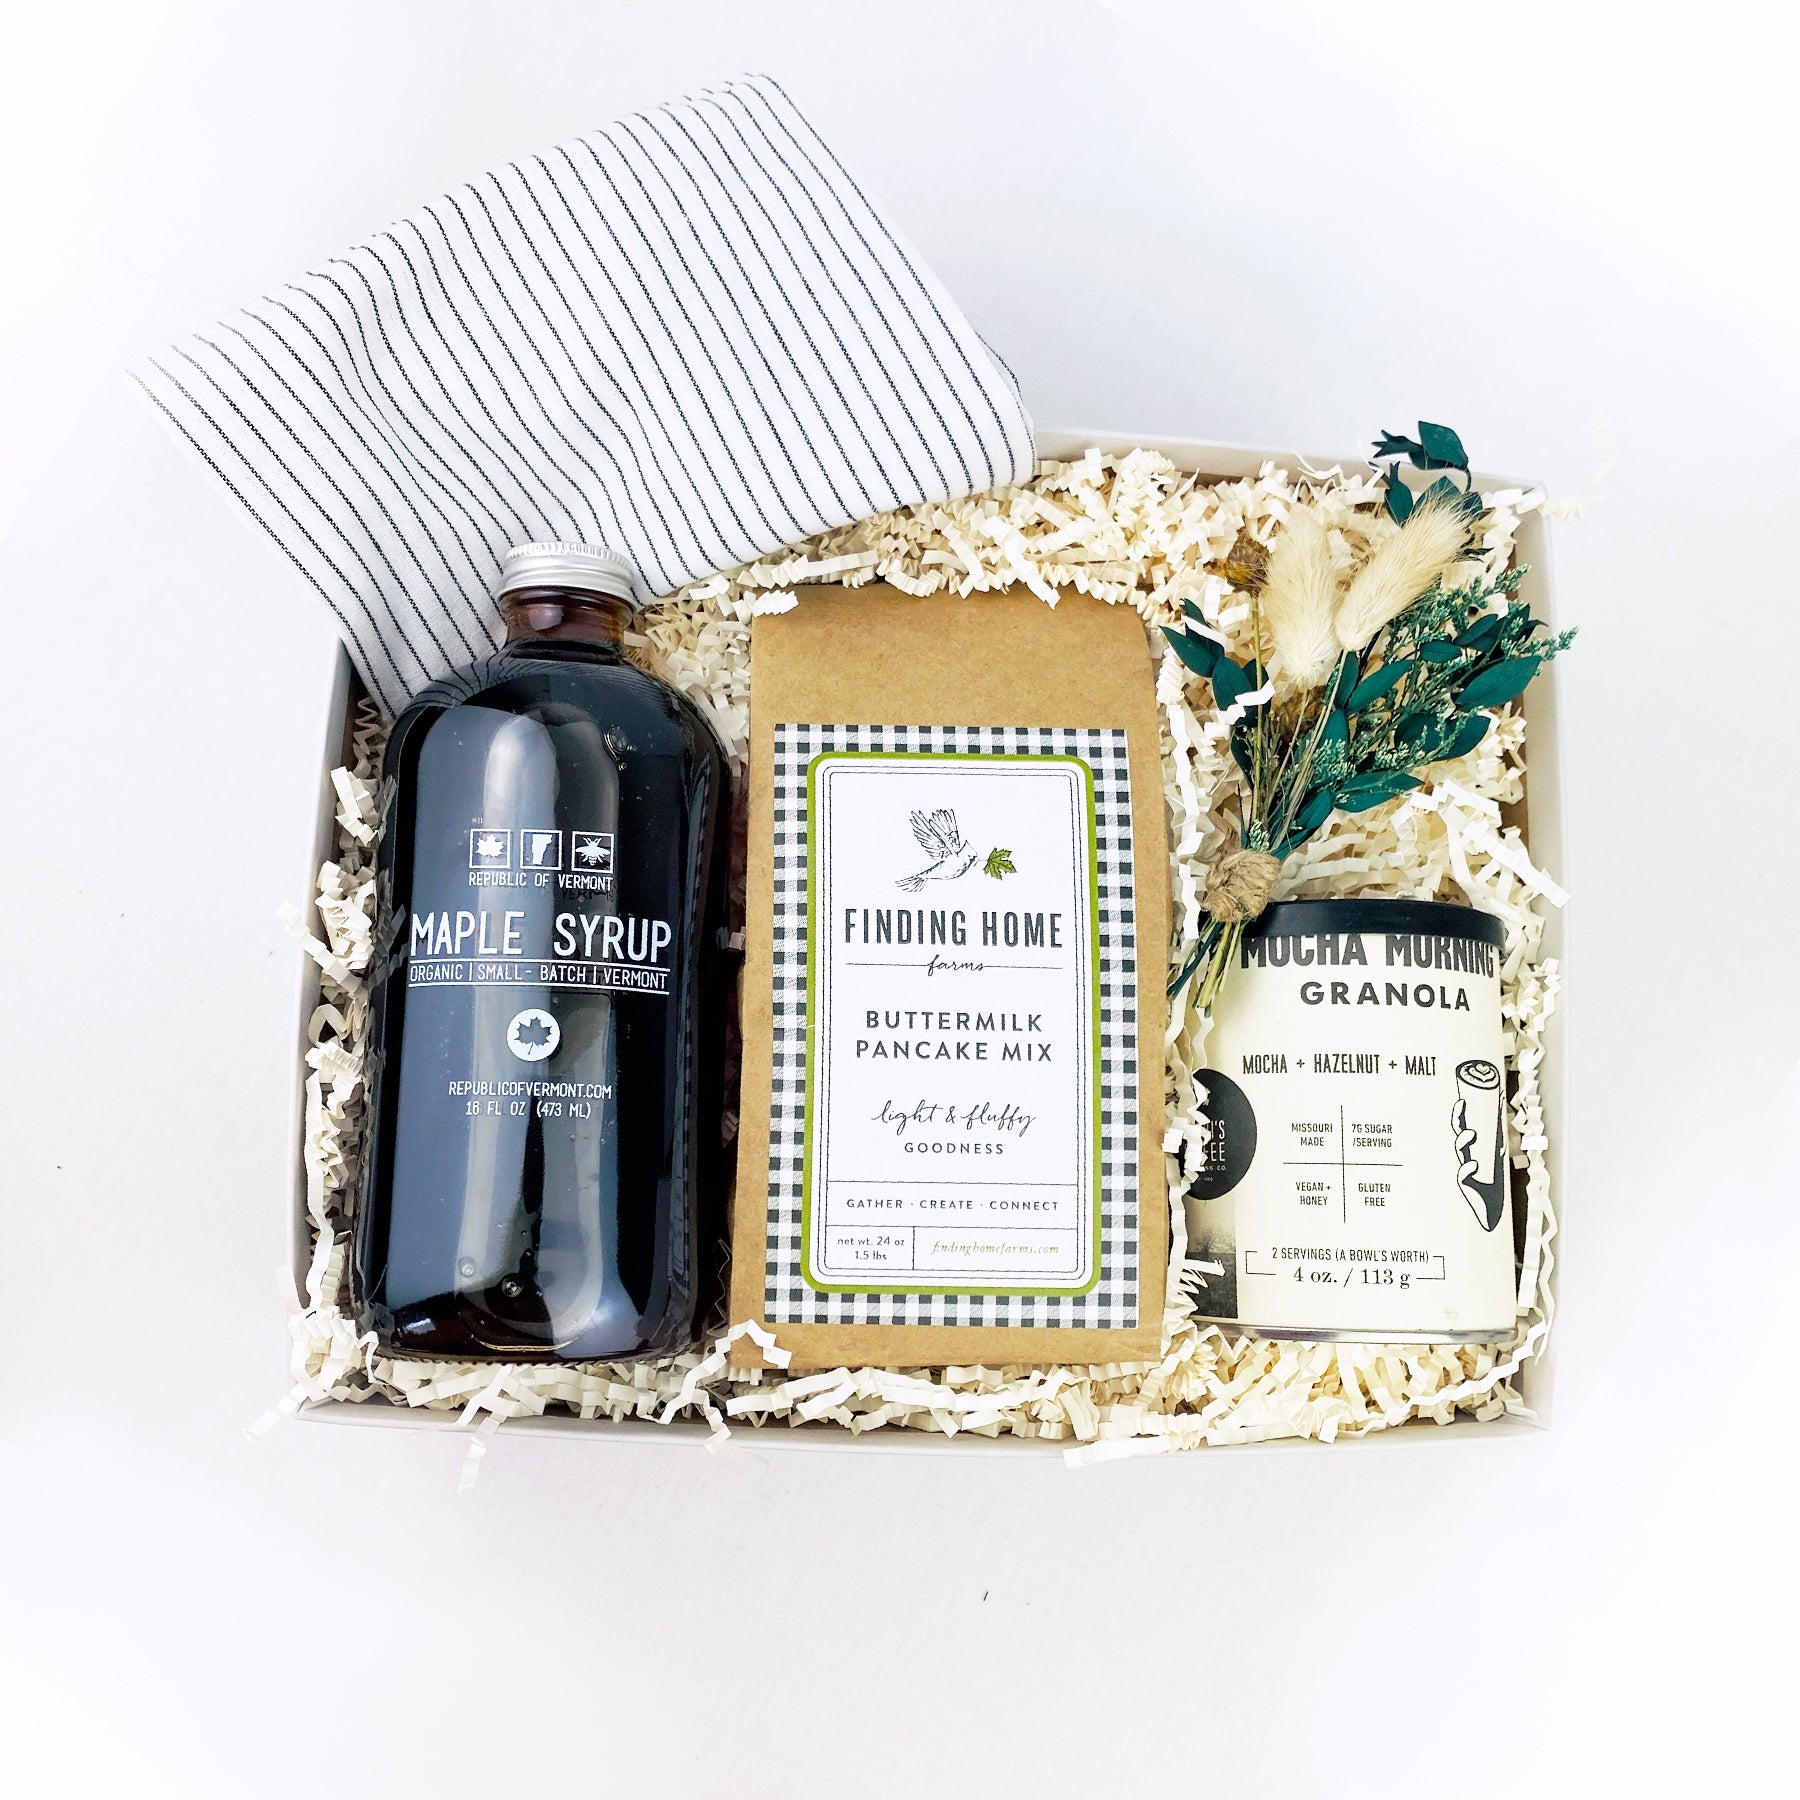 Light grey box containing white linen tea towel with black stripes, glass bottle of vermont maple syrup, can of mocha morning granola, bag of buttermilk pancake mix and dried floral bundle.